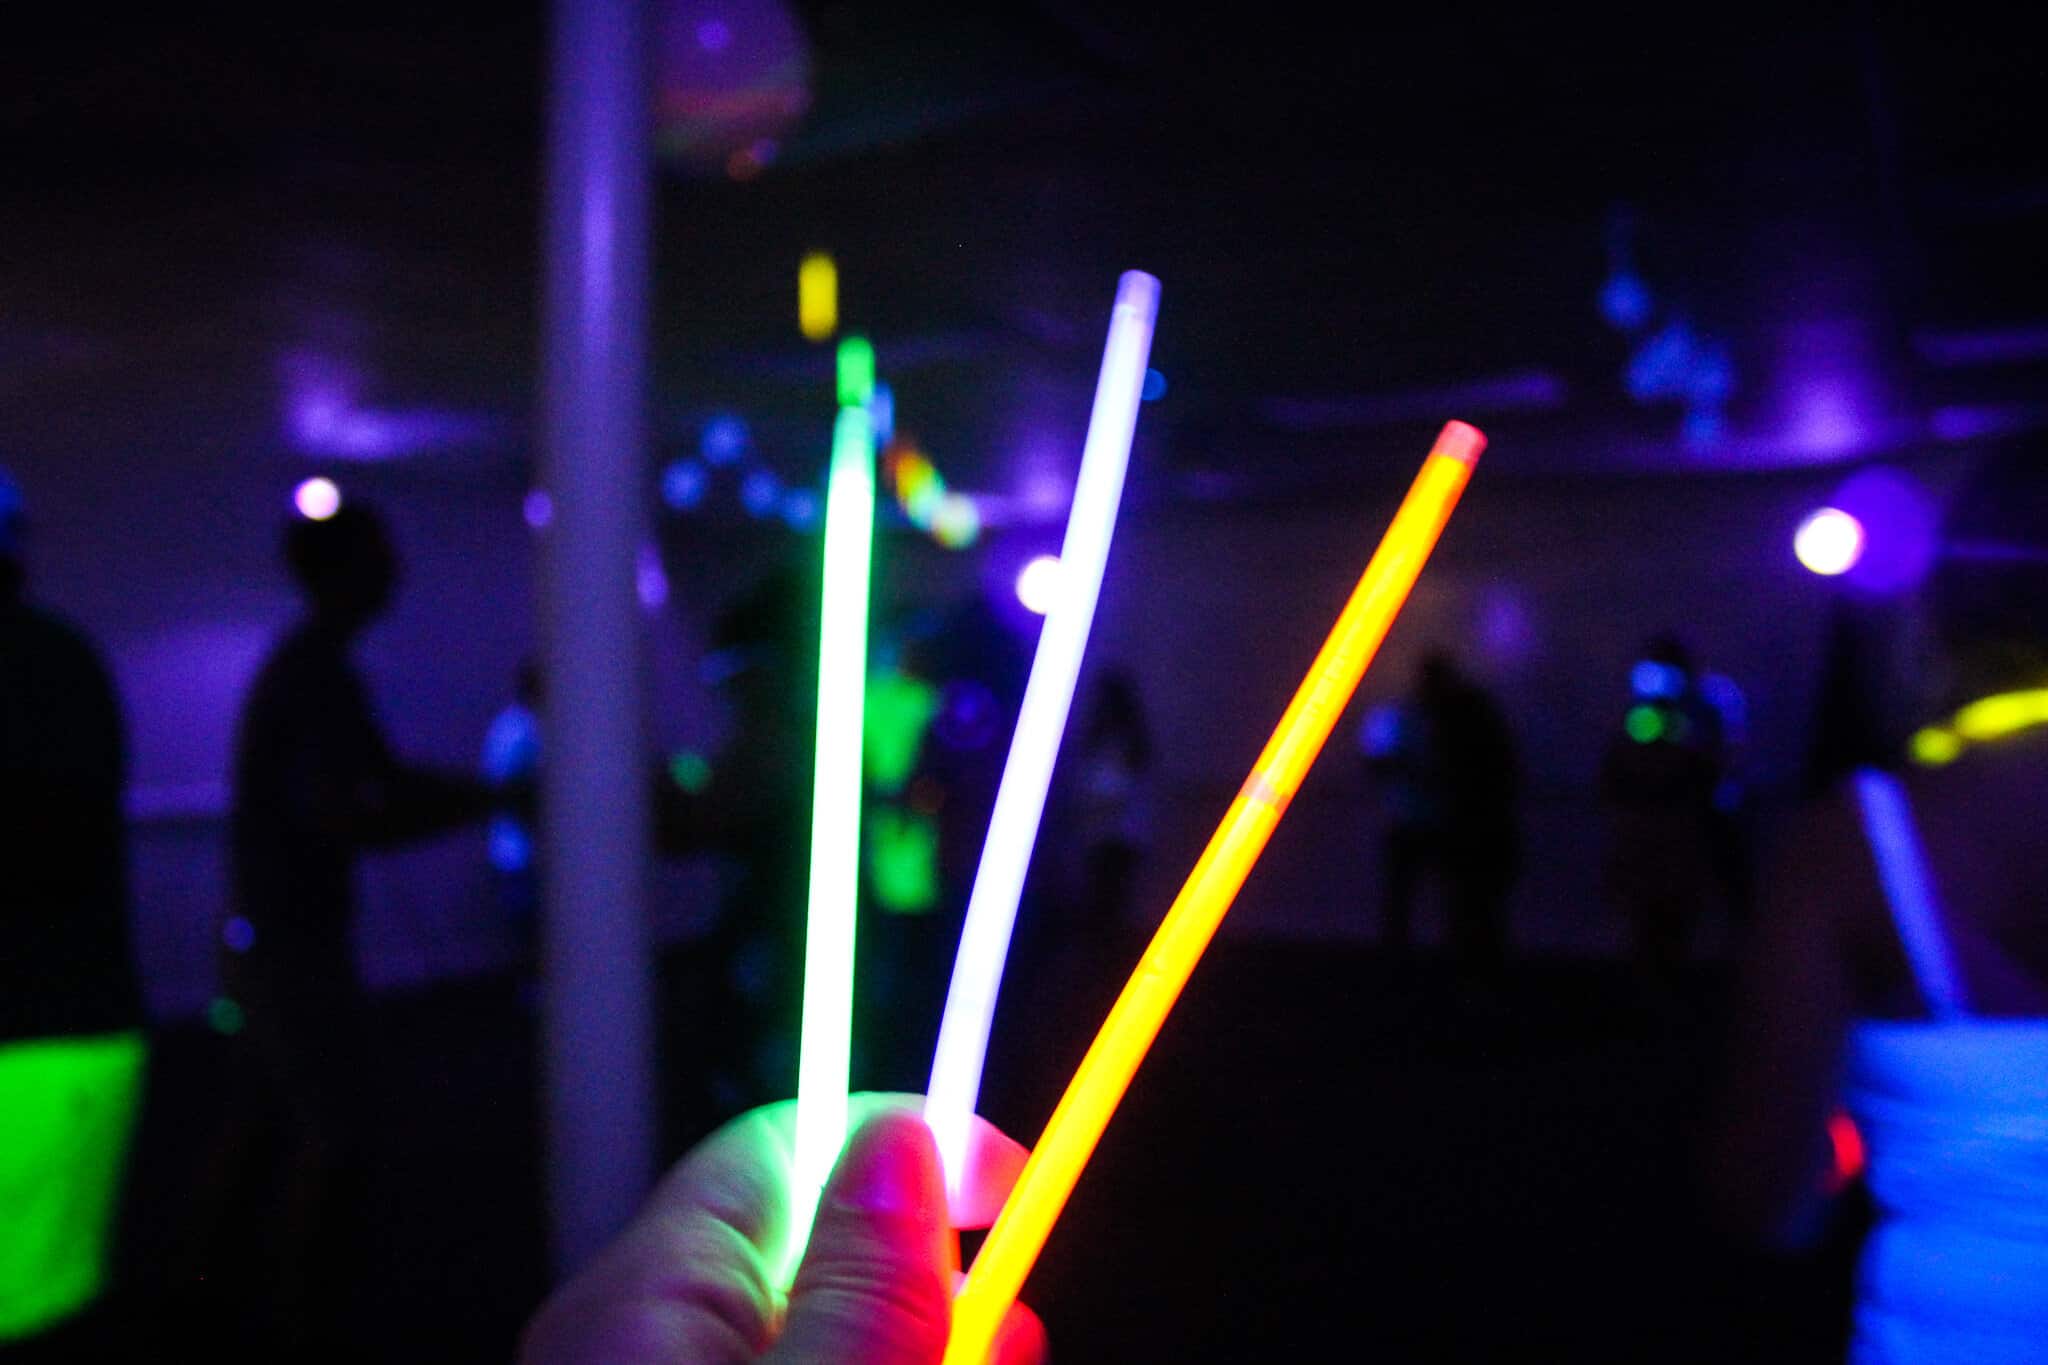 Glow sticks at the glow party.